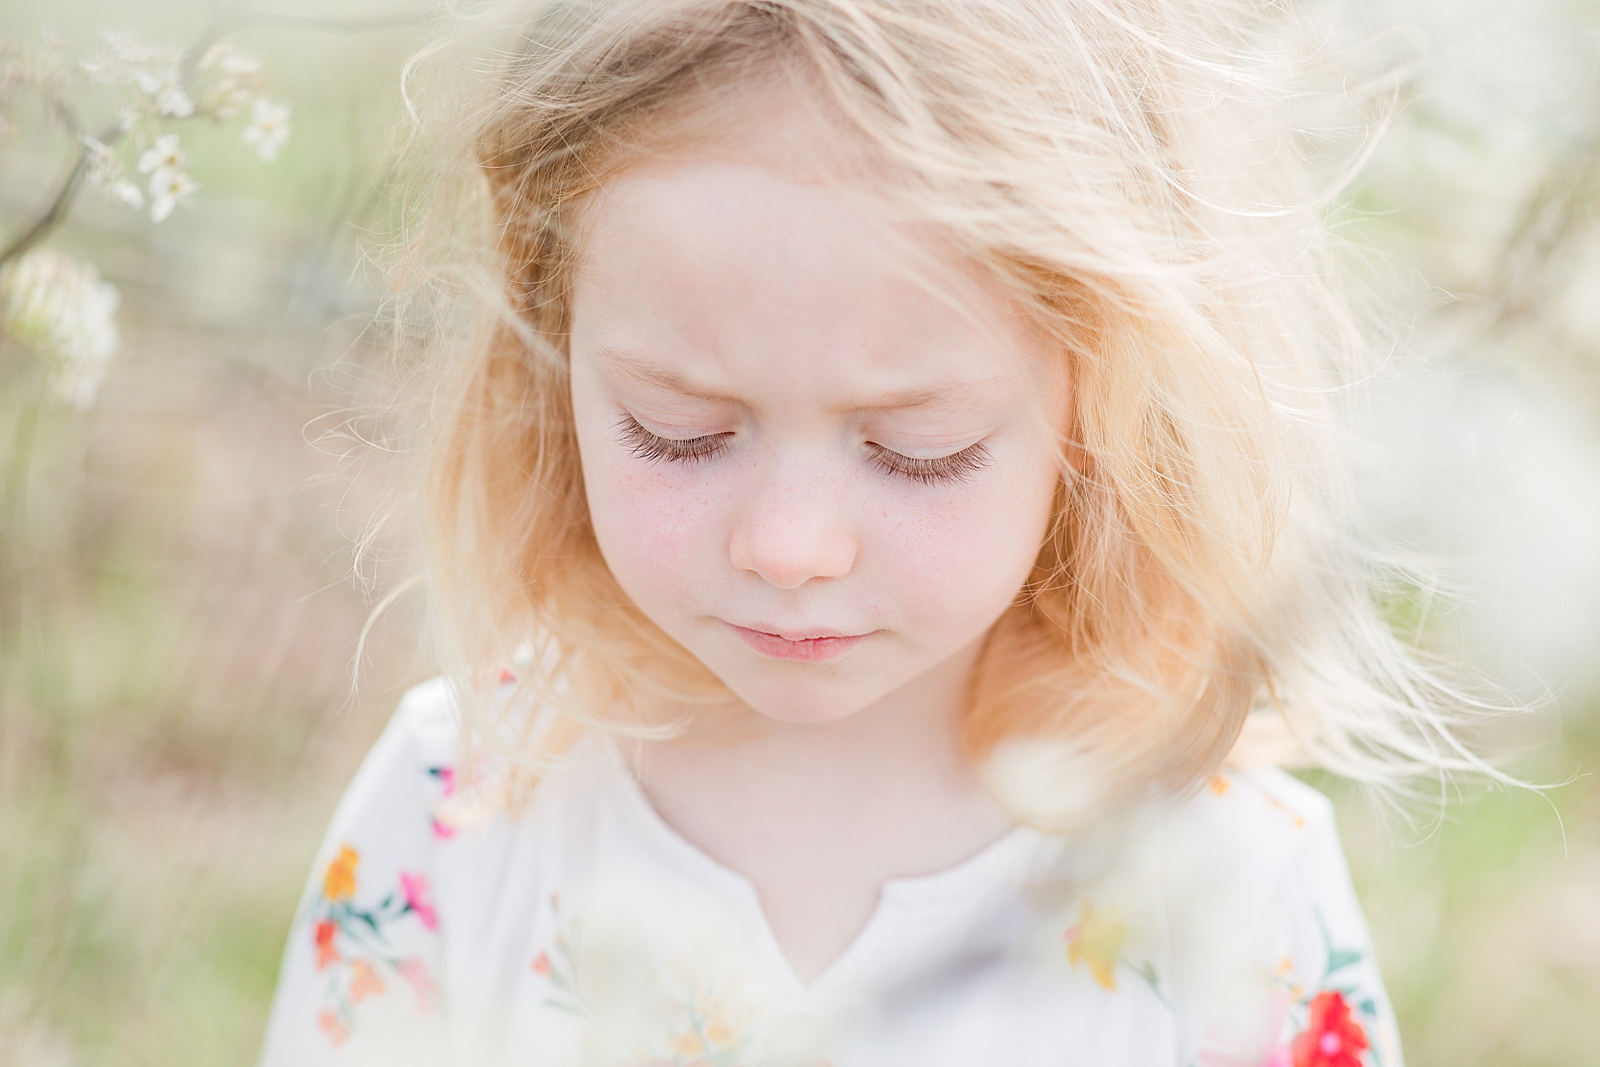 Asheville Photographer's Family little girl hair blowing in the wind Photo